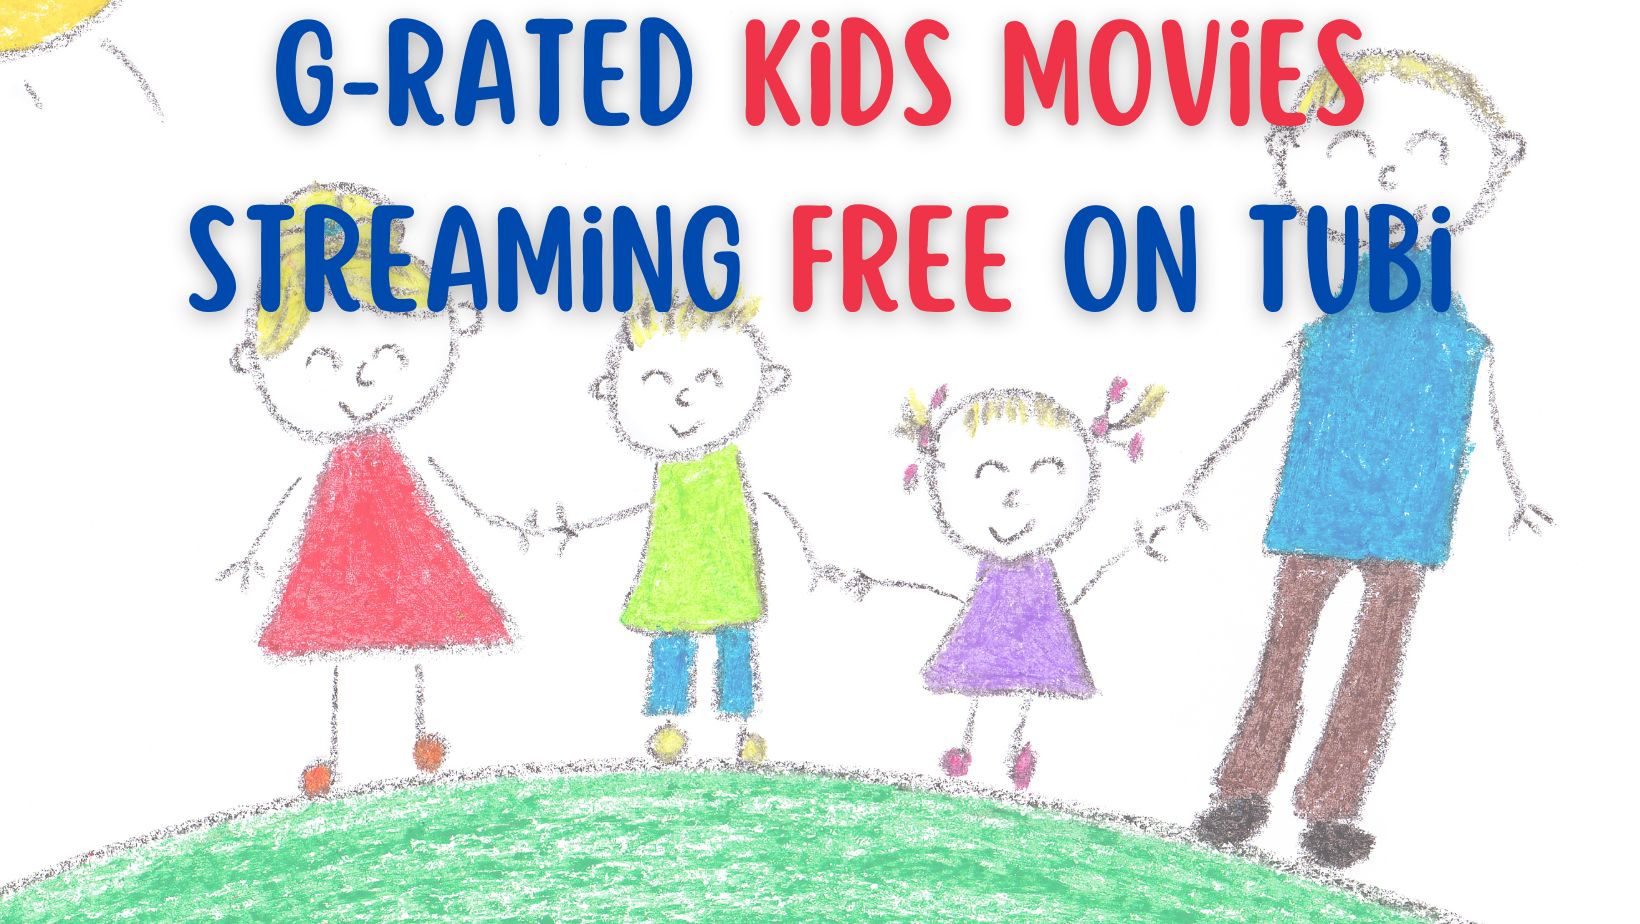 Free Kids Movies to Stream on Tubi: 12 Rated G Animated Kids Movies for All Ages